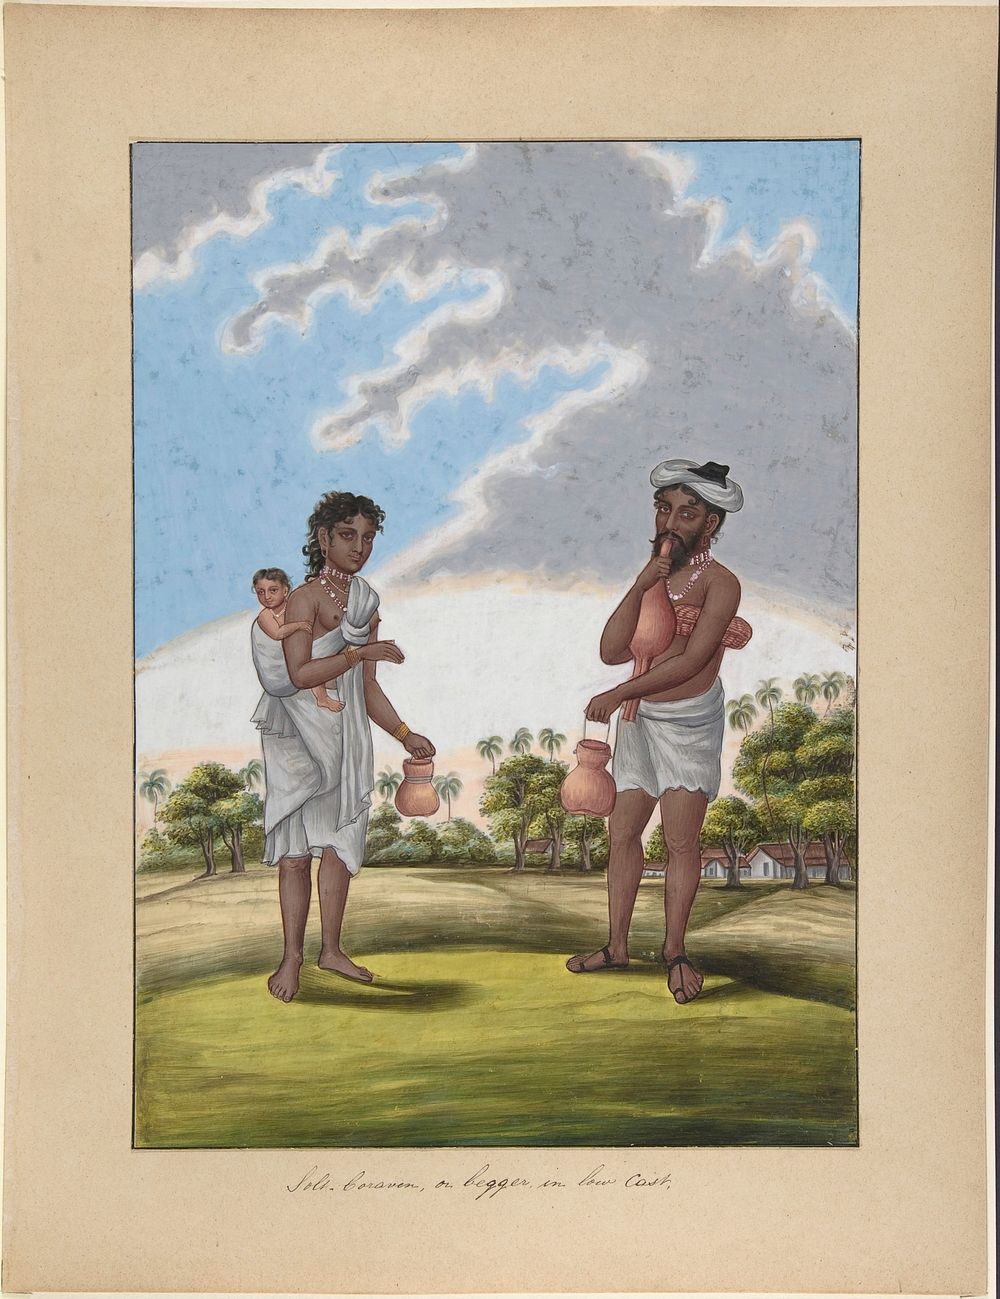 Solf-Coraven, or Beggar, from Indian Trades and Castes, Anonymous, Indian, 19th century